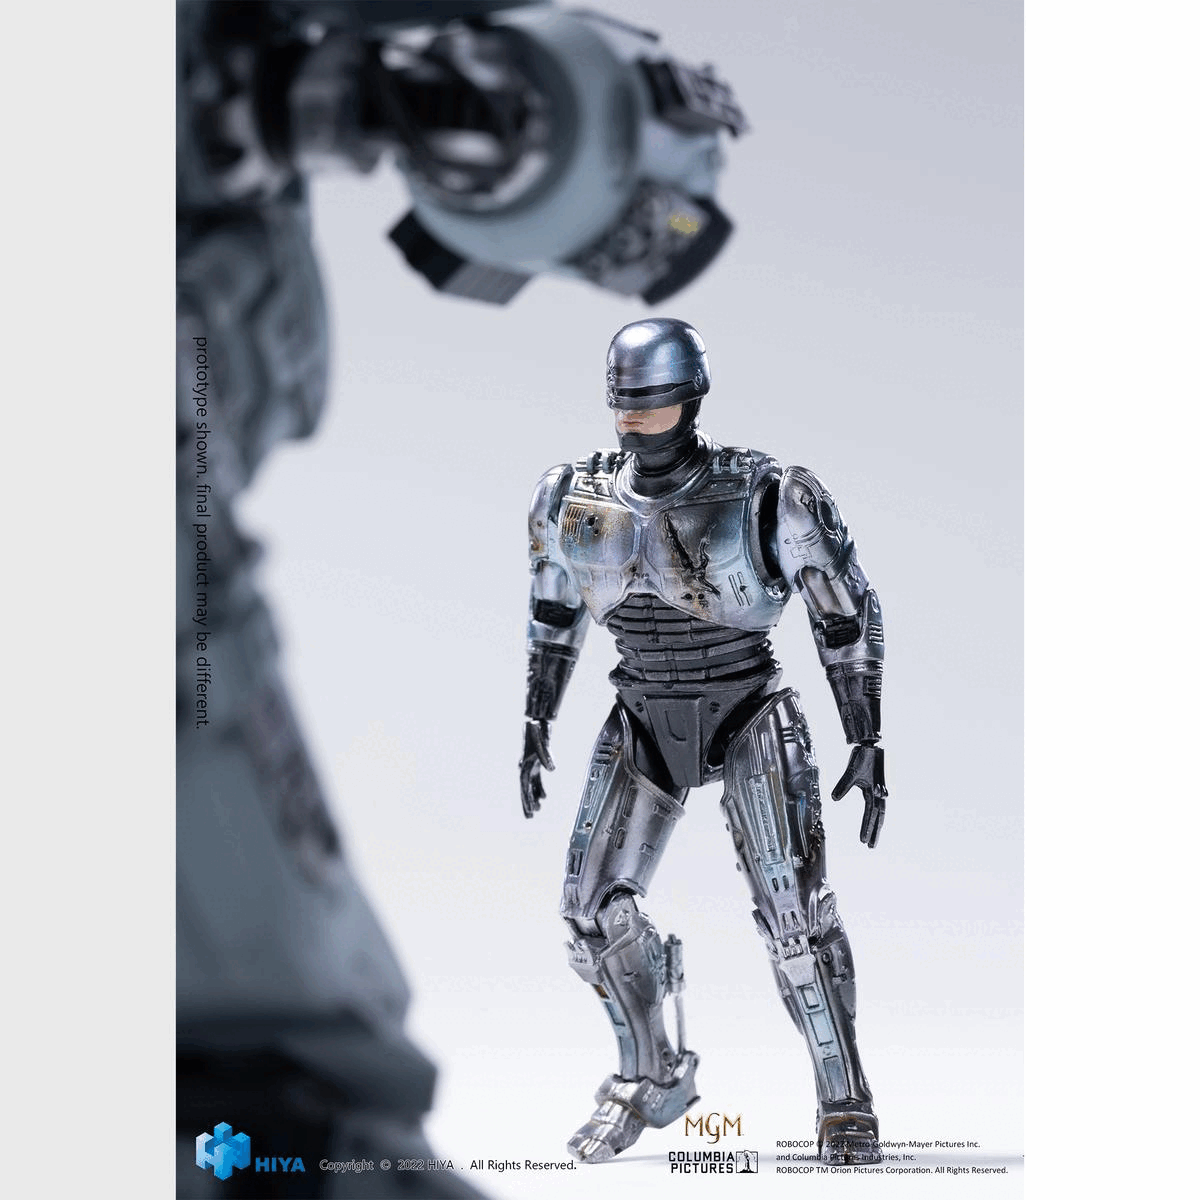 Gif showing the Robocop statue from multiple angles. Text on the images reads Prototype shown Final product may be different. HIYA copyright. All rights reserved. MGM Columbia Pictures. Robocop Metro-Goldwyn-Mayer Pictures Inc. and Columbia Pictures Industries, Inc. Robocop TM Orion Pictures Corporation. All Rights reserved.